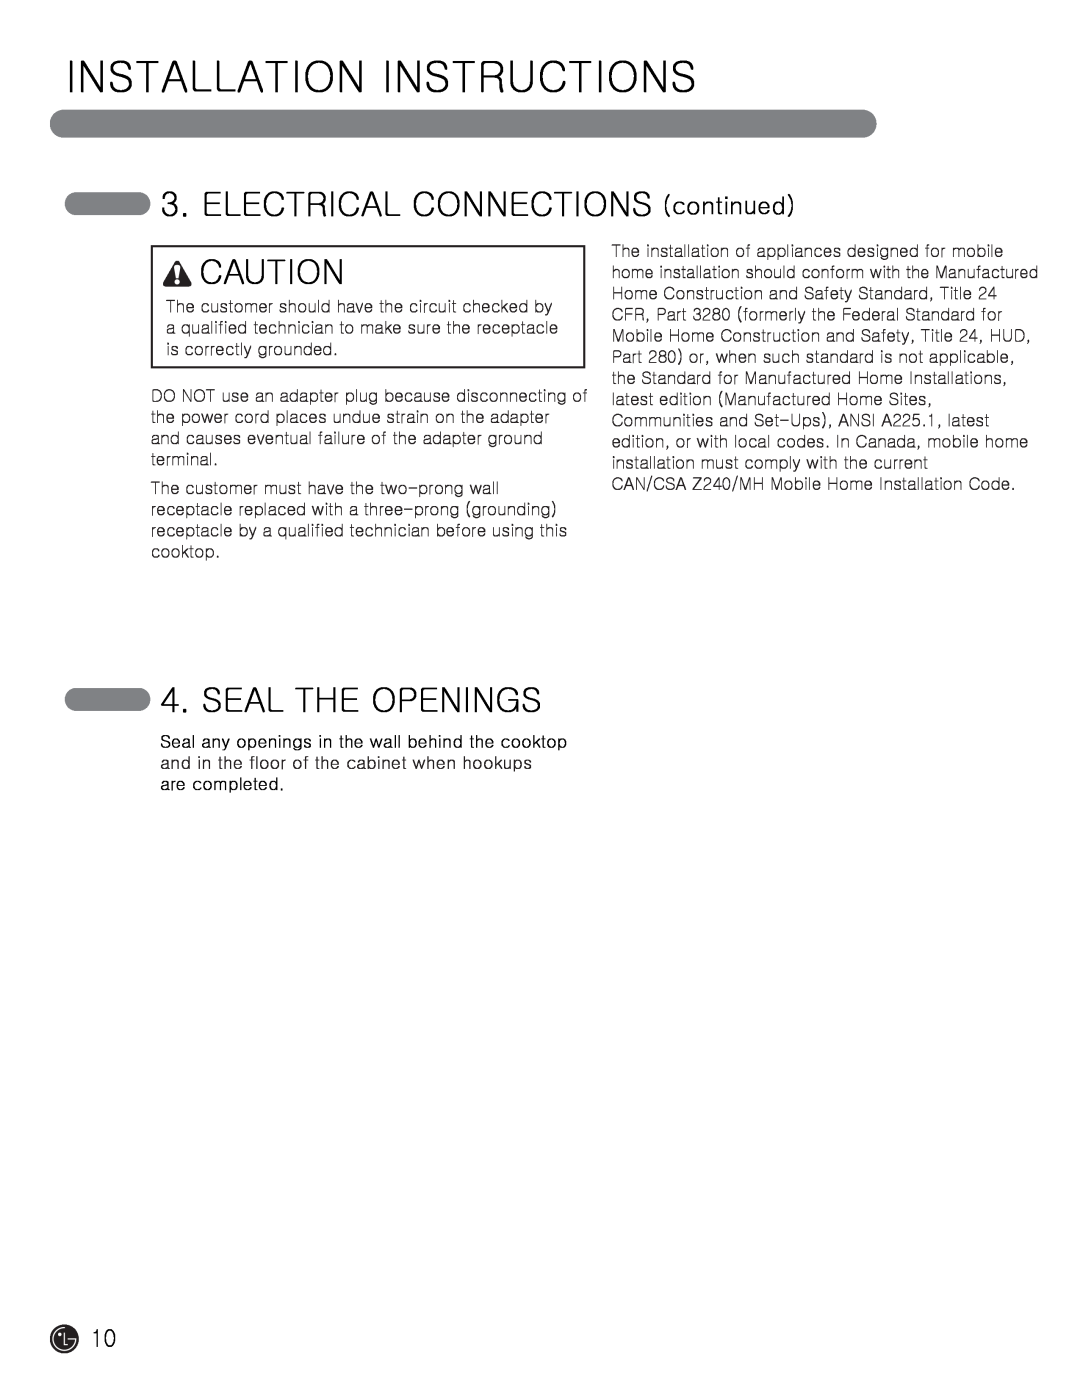 LG Electronics MFL62725501 ELECTRICAL CONNECTIONS continued, Seal The Openings, Installation Instructions 